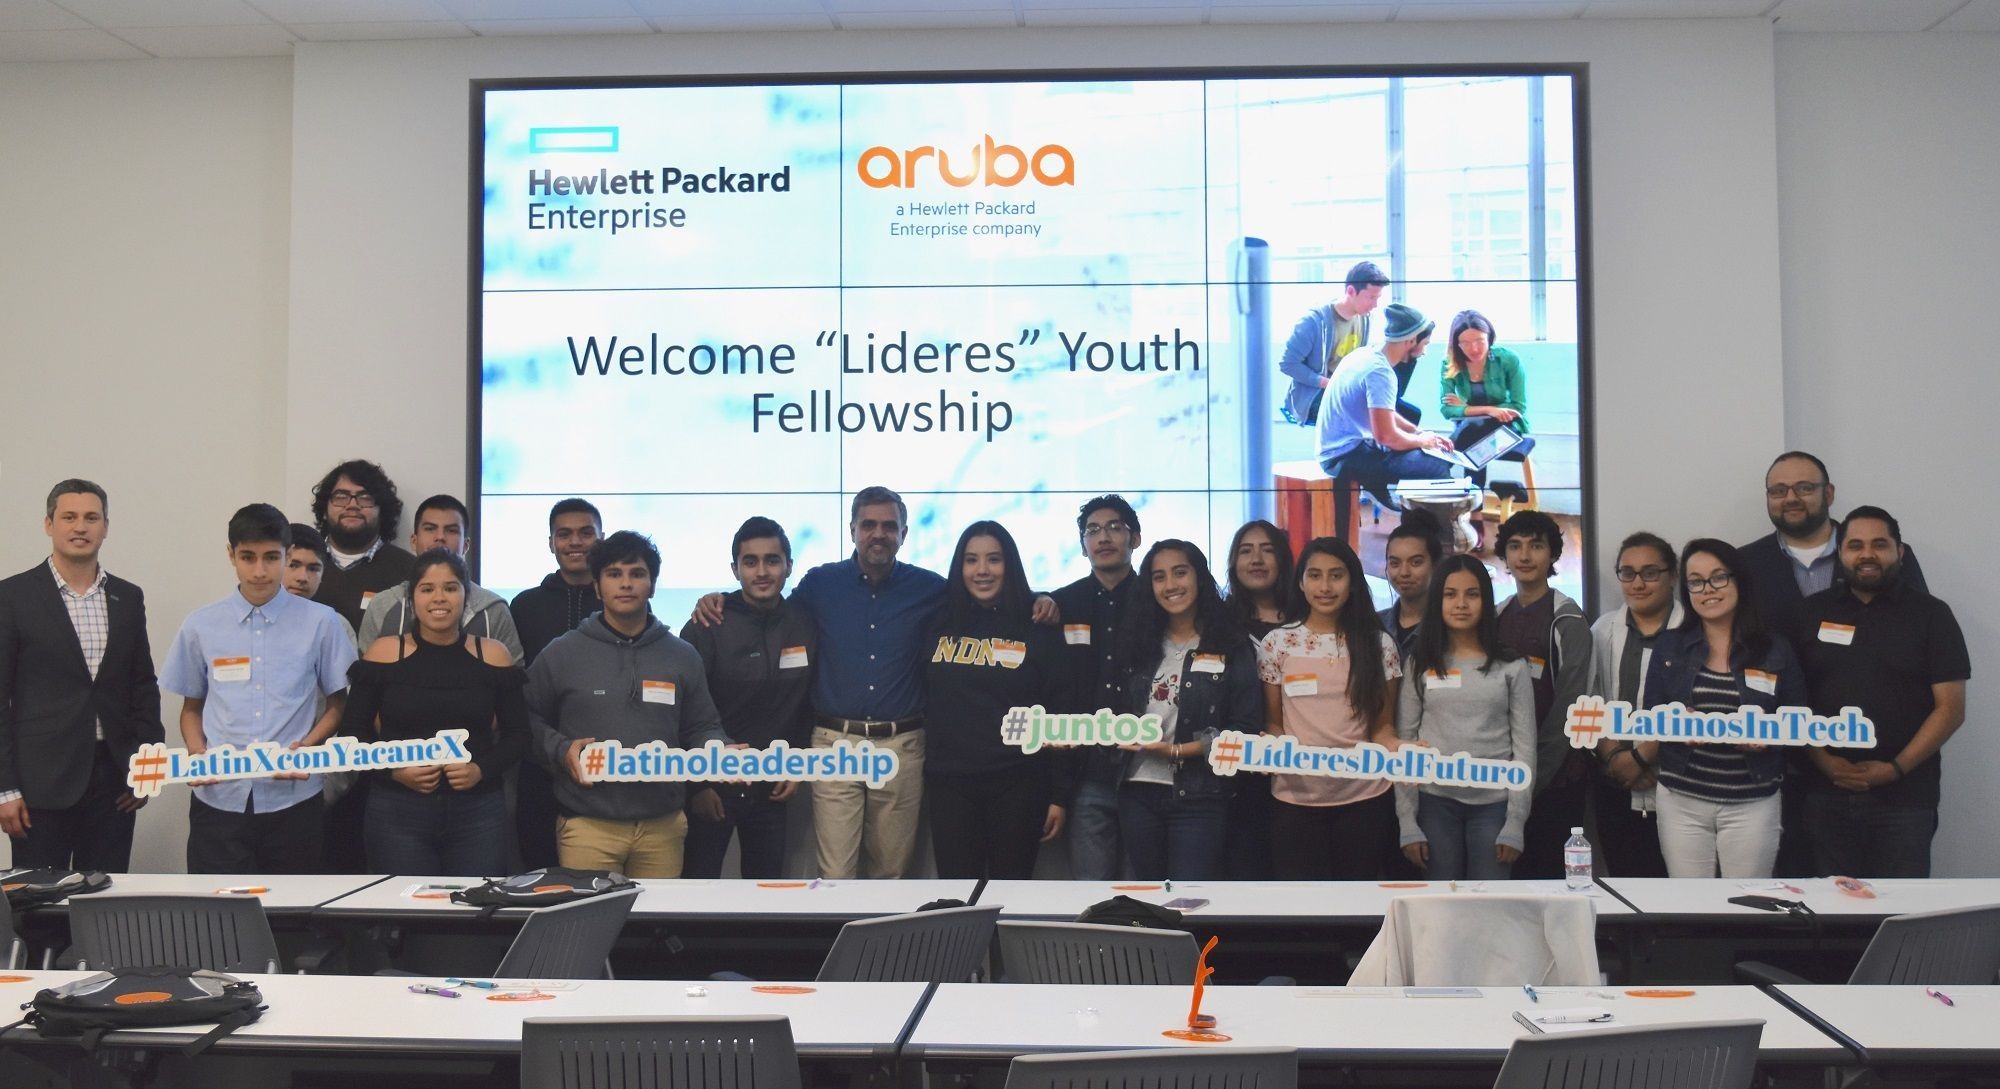 Lideres Youth Fellowship visited HPE offices in Santa Clara, CA.